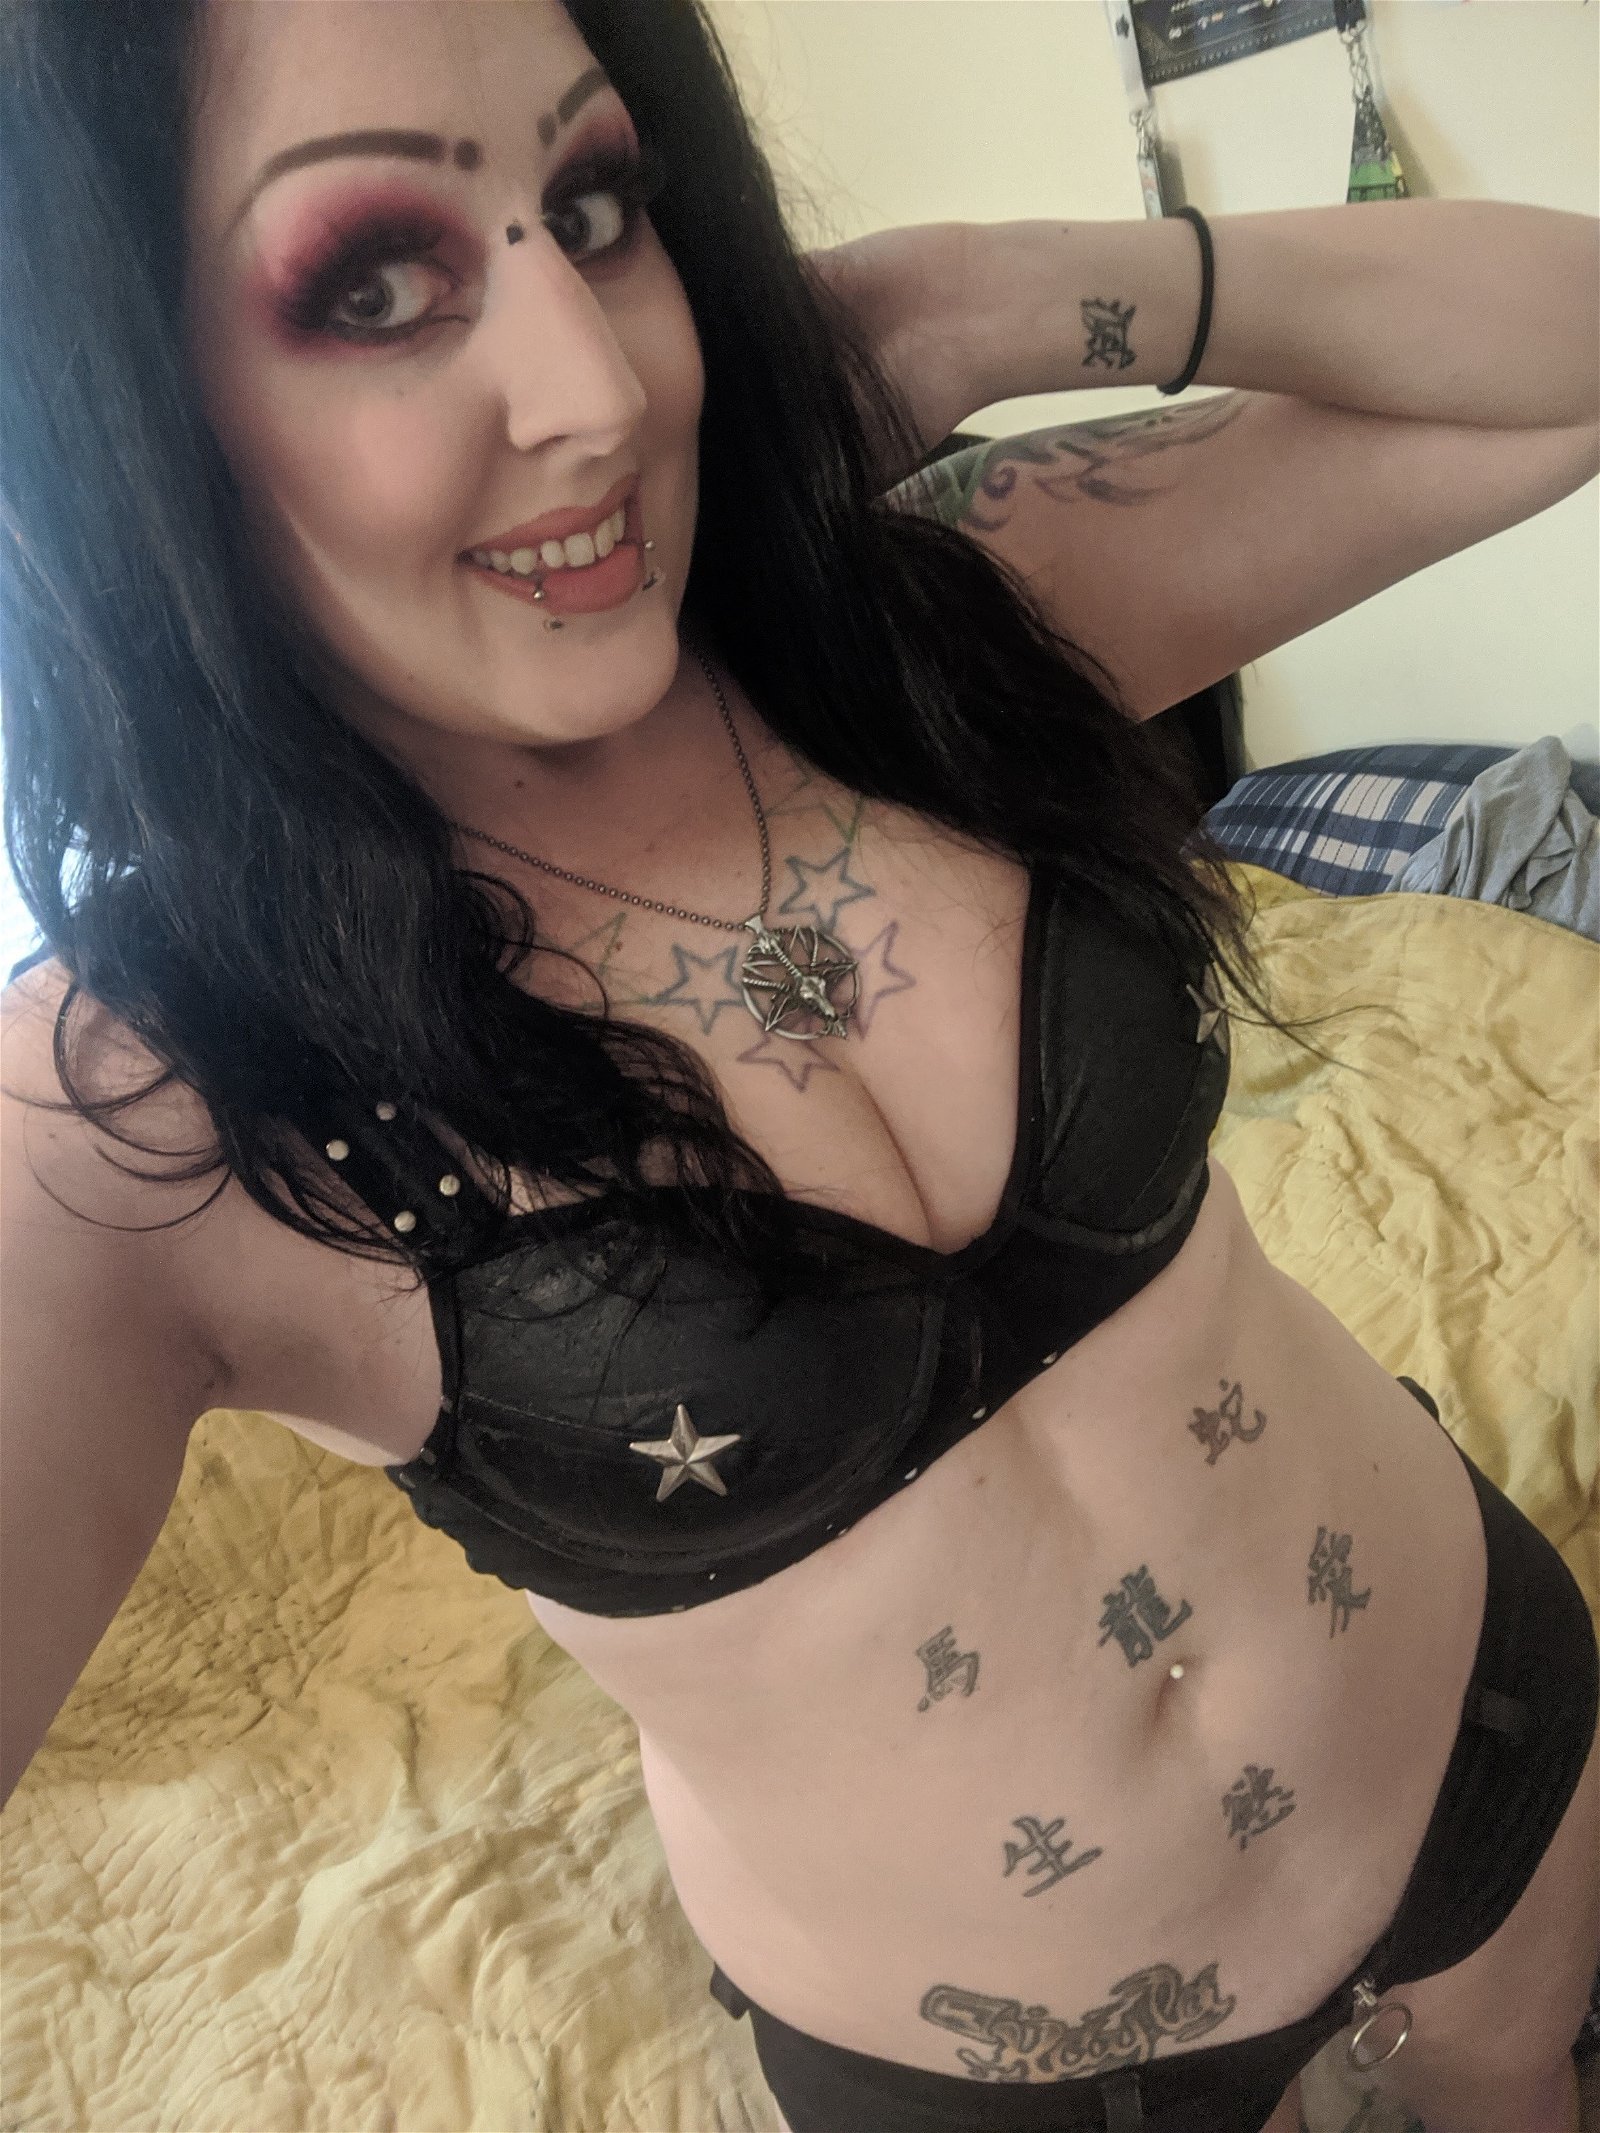 Photo by VesperaSage with the username @VesperaSage, who is a star user,  August 18, 2020 at 11:05 PM. The post is about the topic Amateurs and the text says 'Blonde or brunette?
#sharesome #lingerie #'